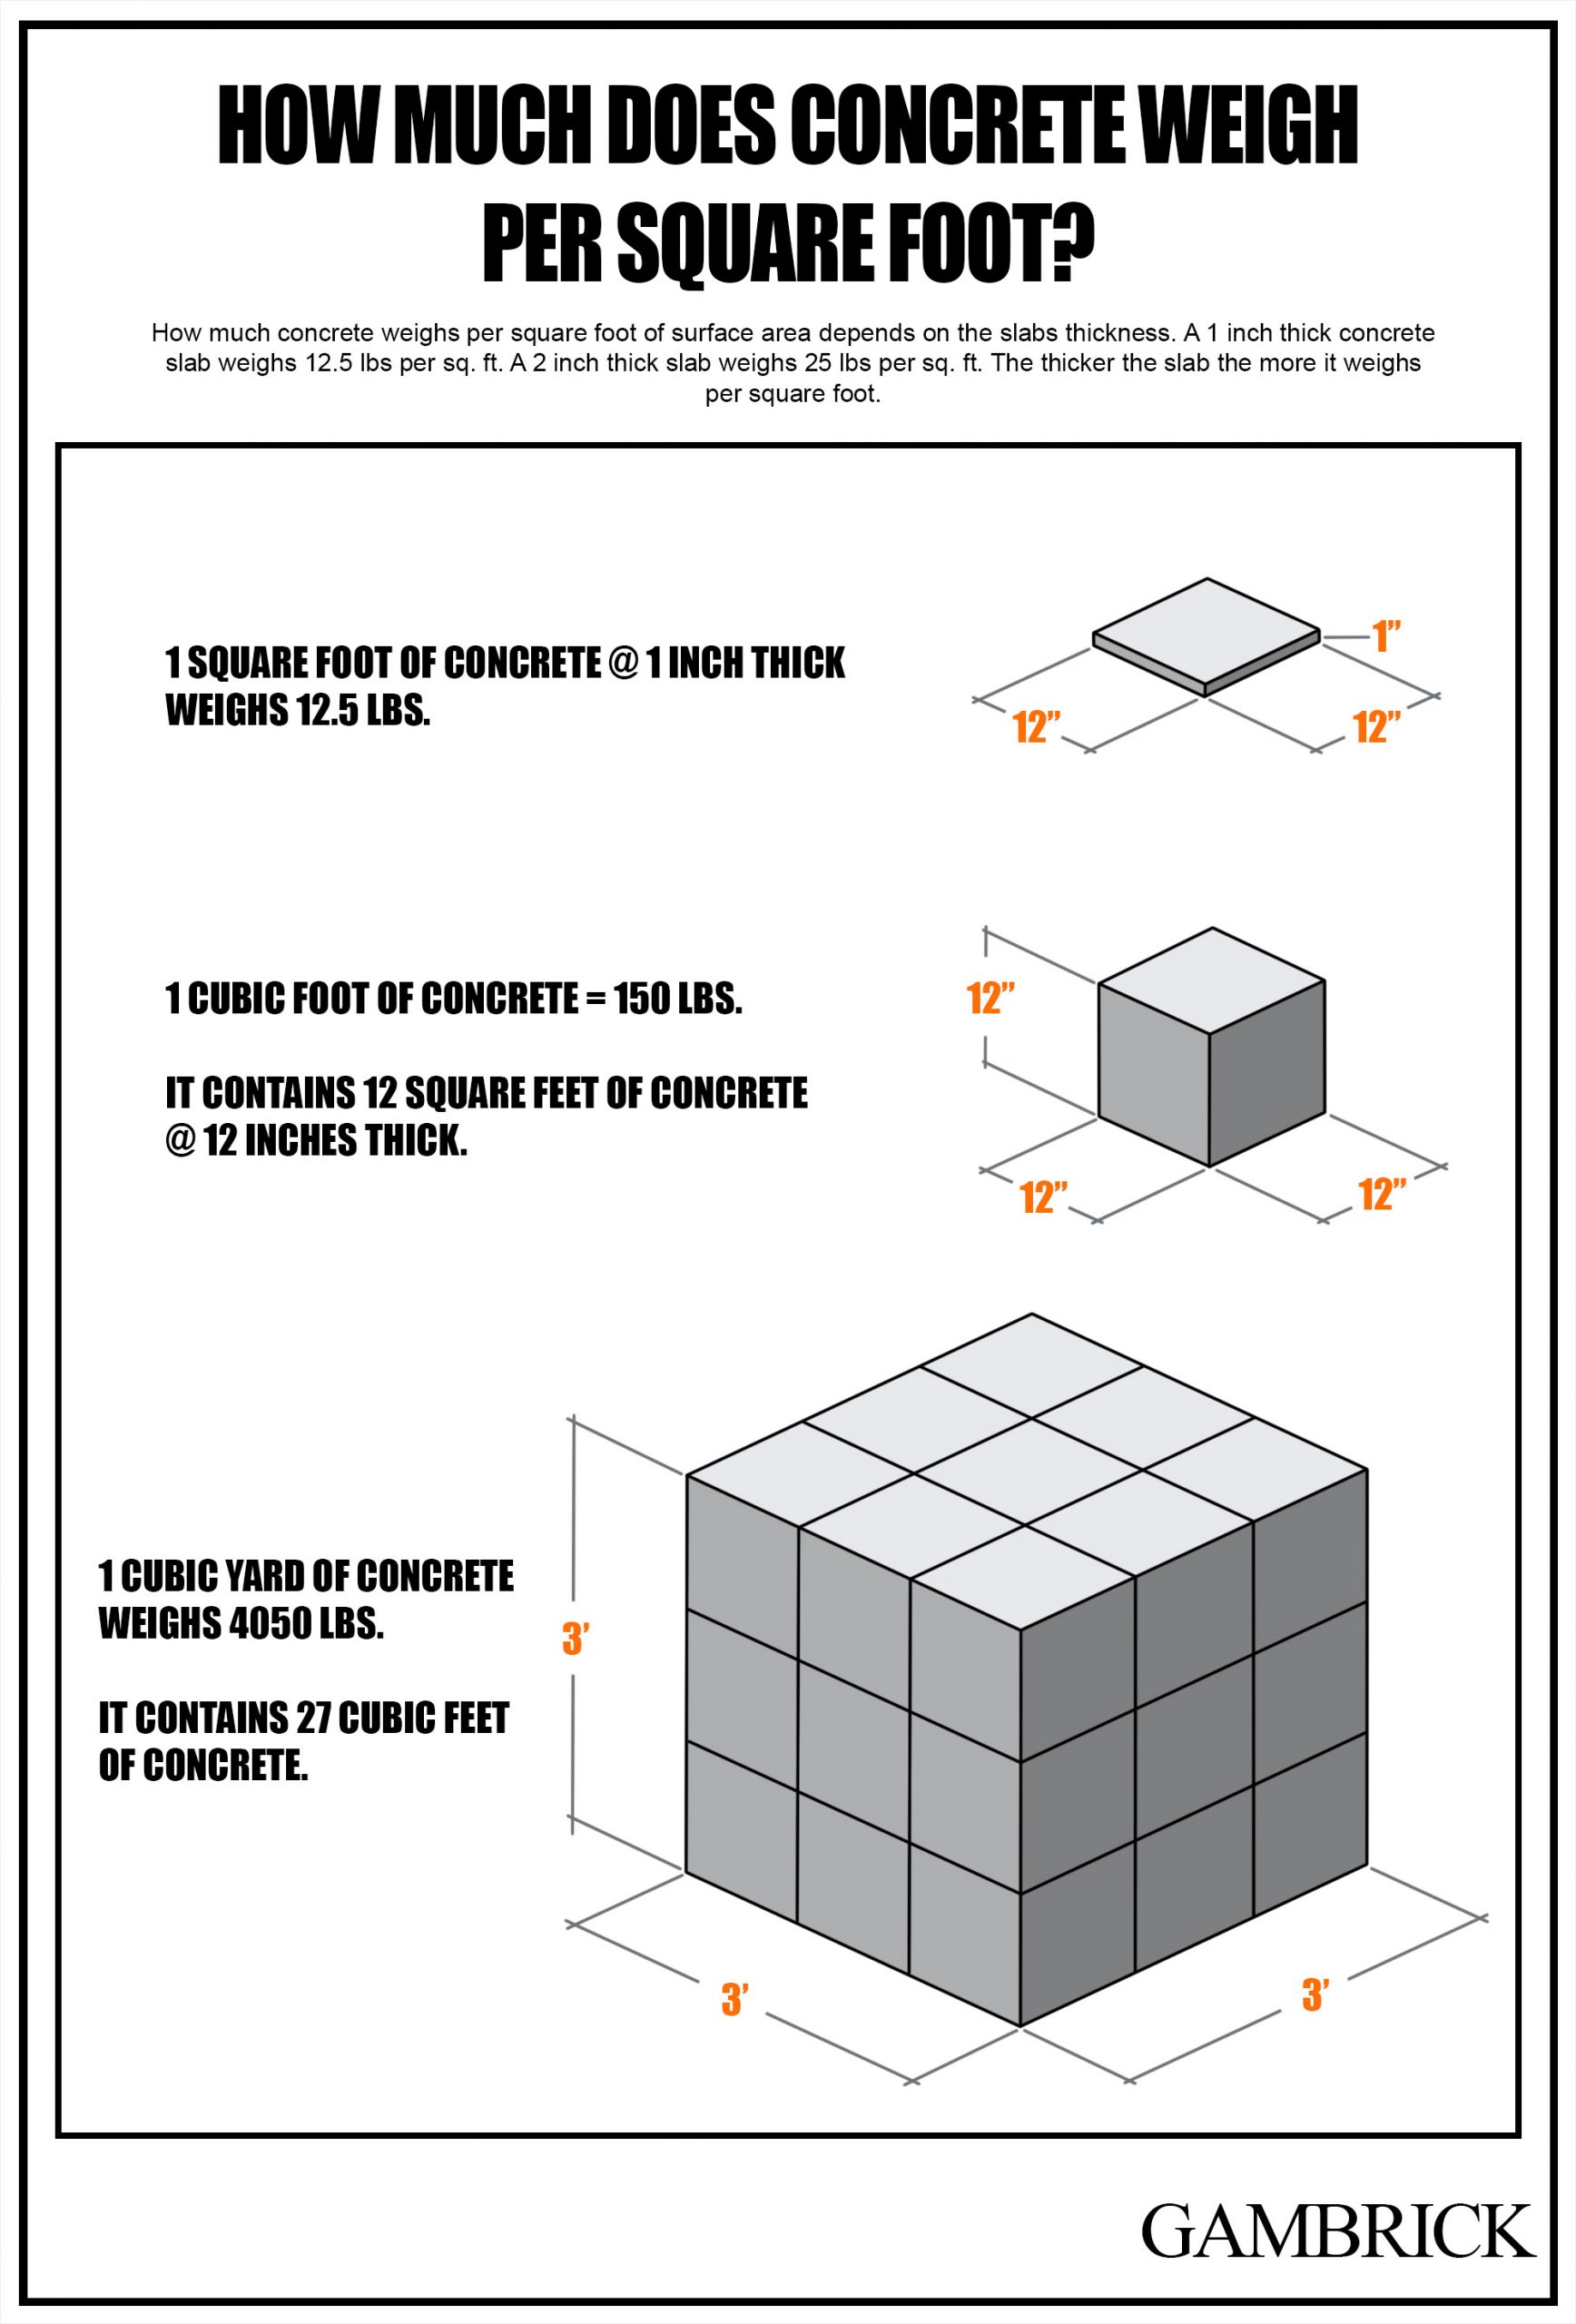 how much does concrete weigh per square foot infographic q